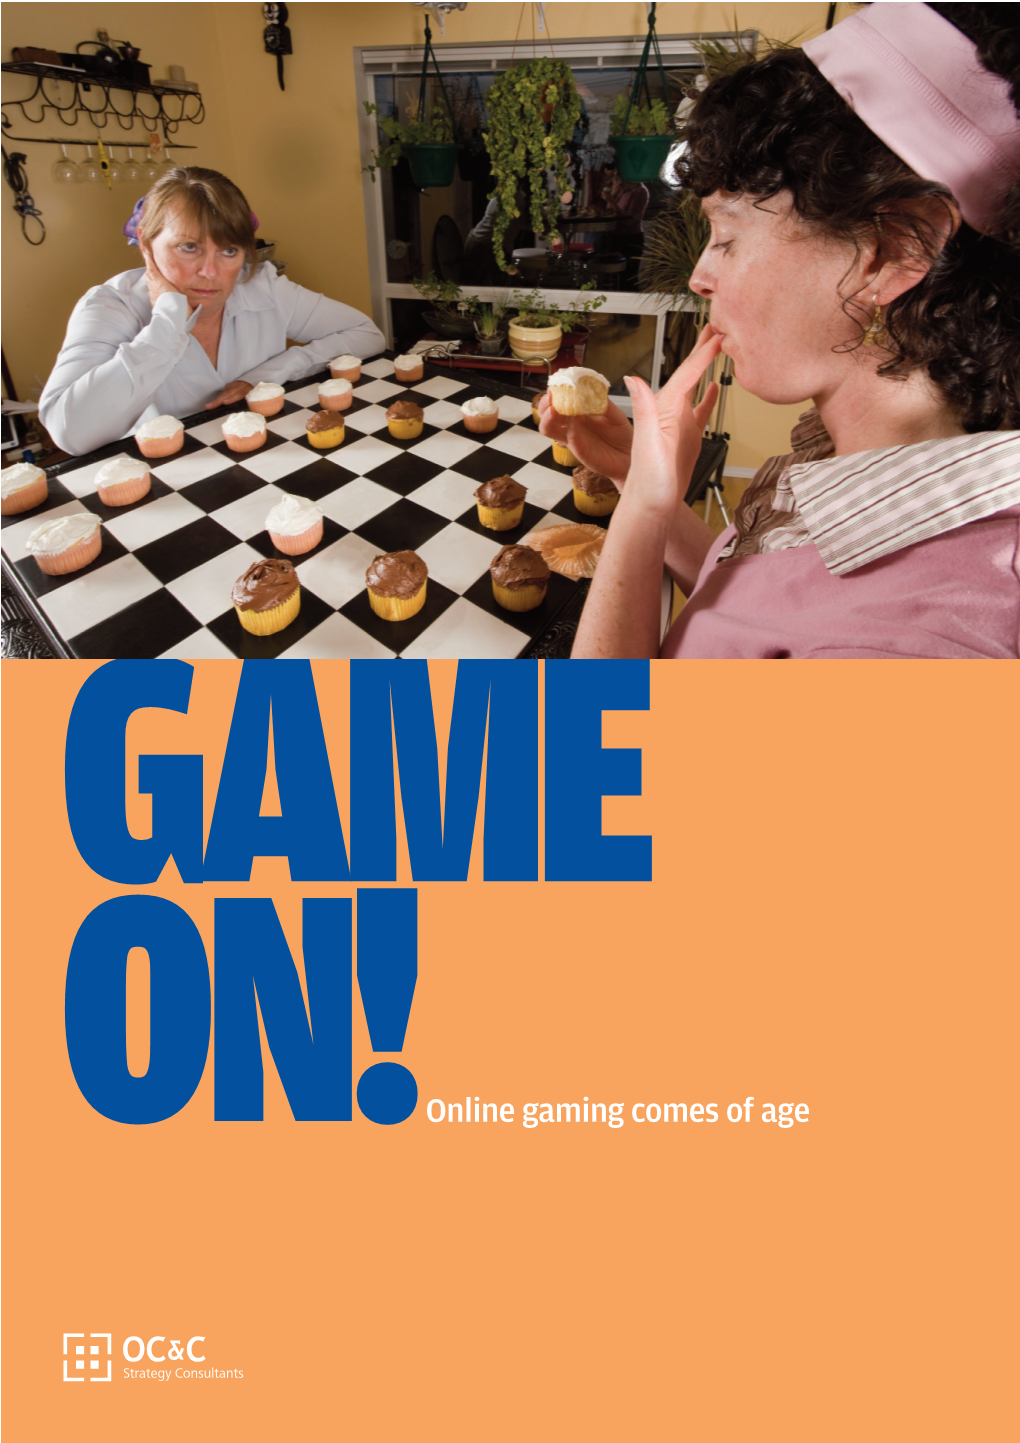 Online Gaming Comes of Age GAME ON! the Online Gaming Industry Is Undergoing a Period of Rapid Investment, Expansion and Innovation